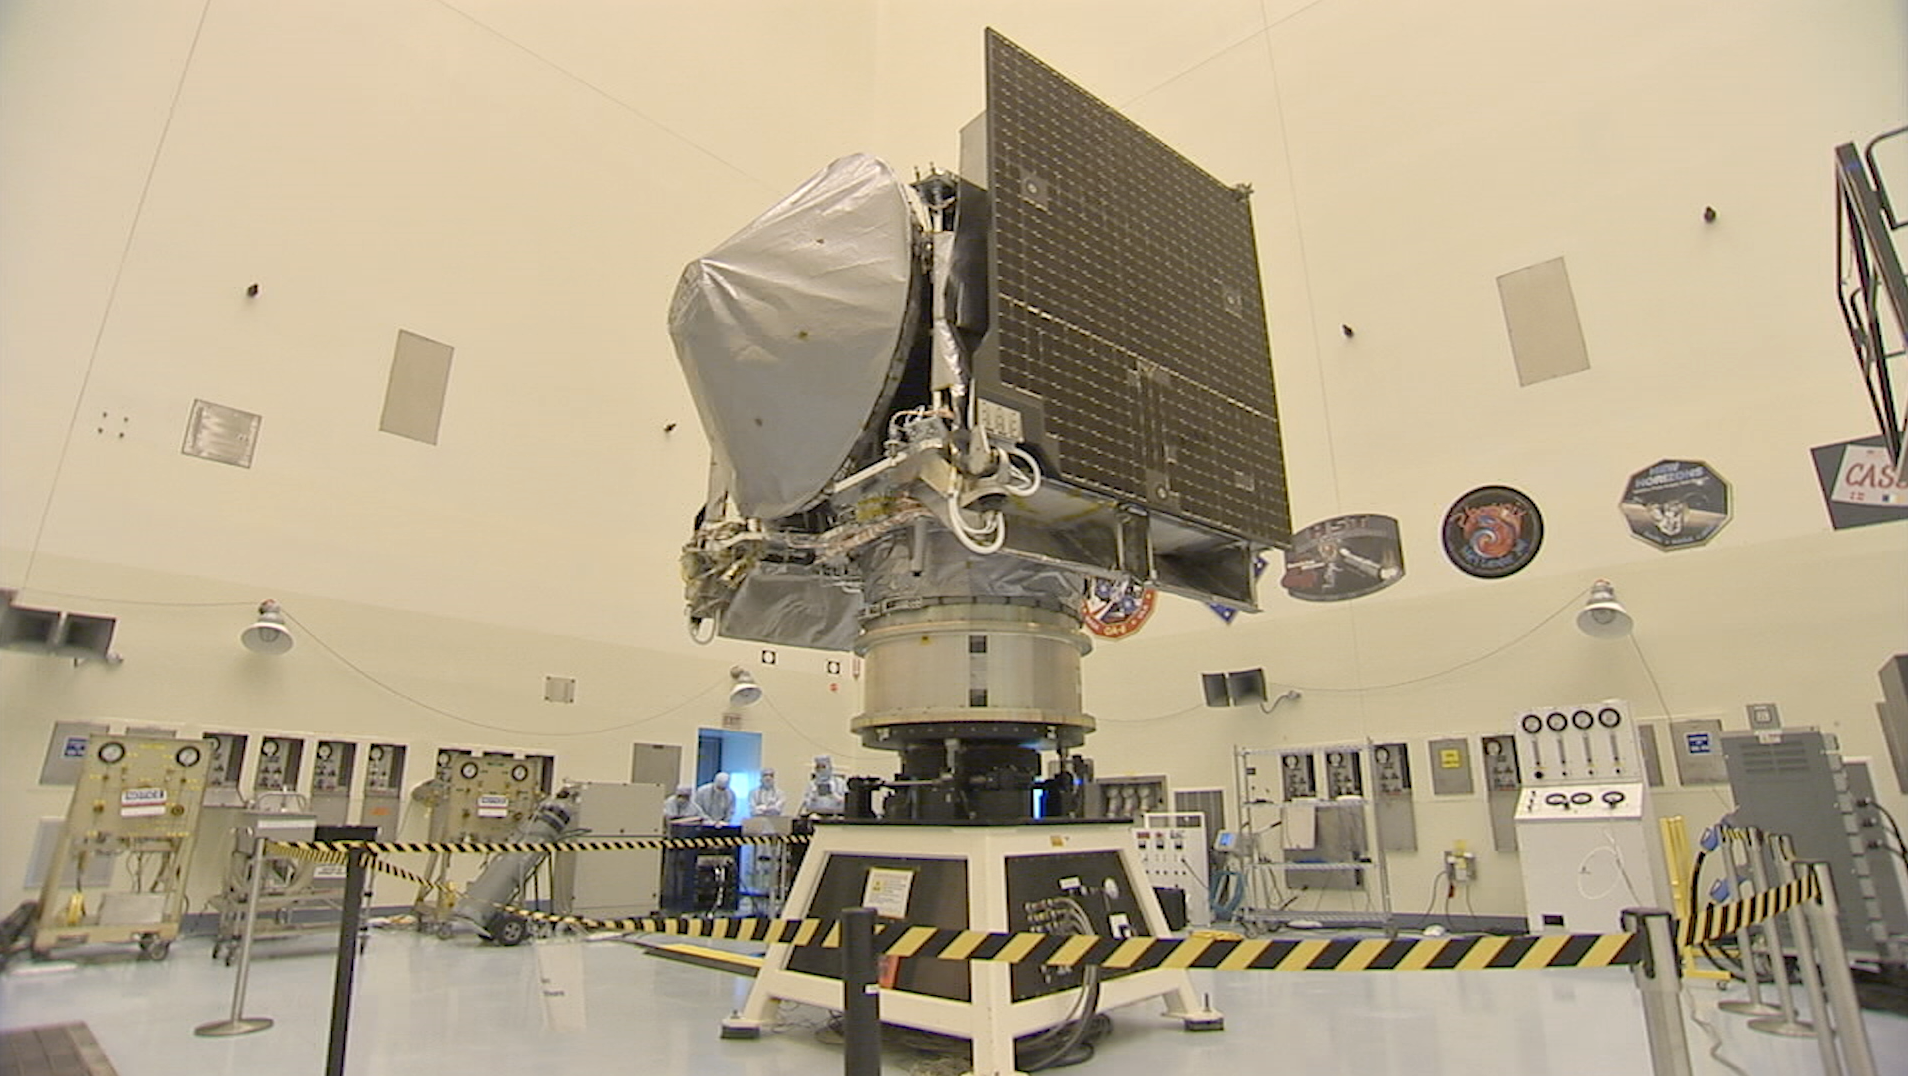 B-roll of OSIRIS-REx arriving at the Kennedy Space Center in May 2016, leading to a spin test and balance test.